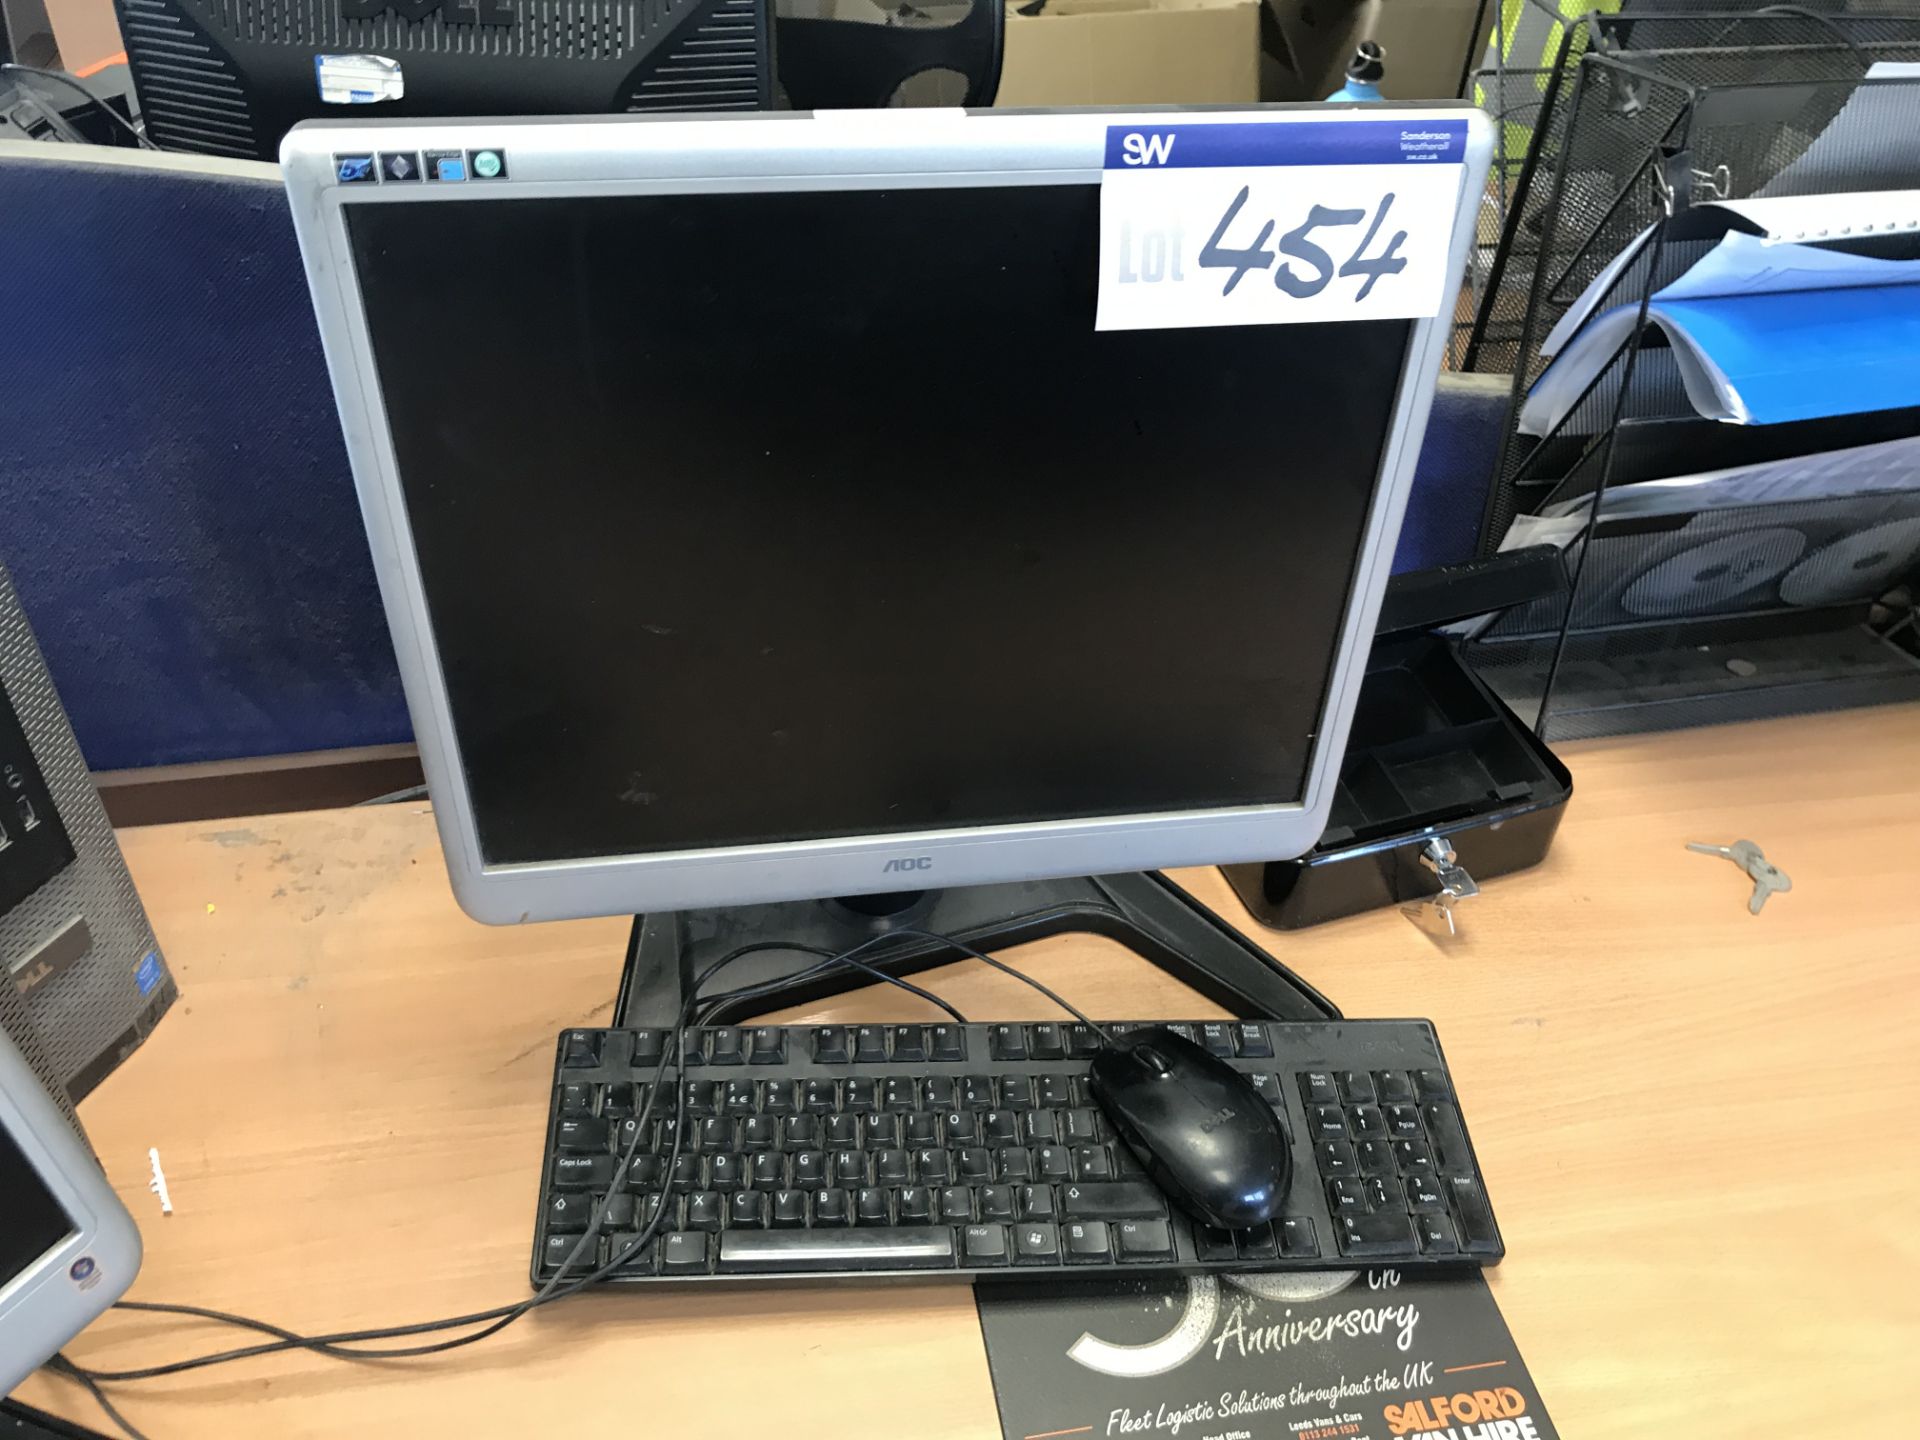 Dell Optiplex 3020 Intel Core i3 Personal Computer (hard disk removed), with flat screen monitor,